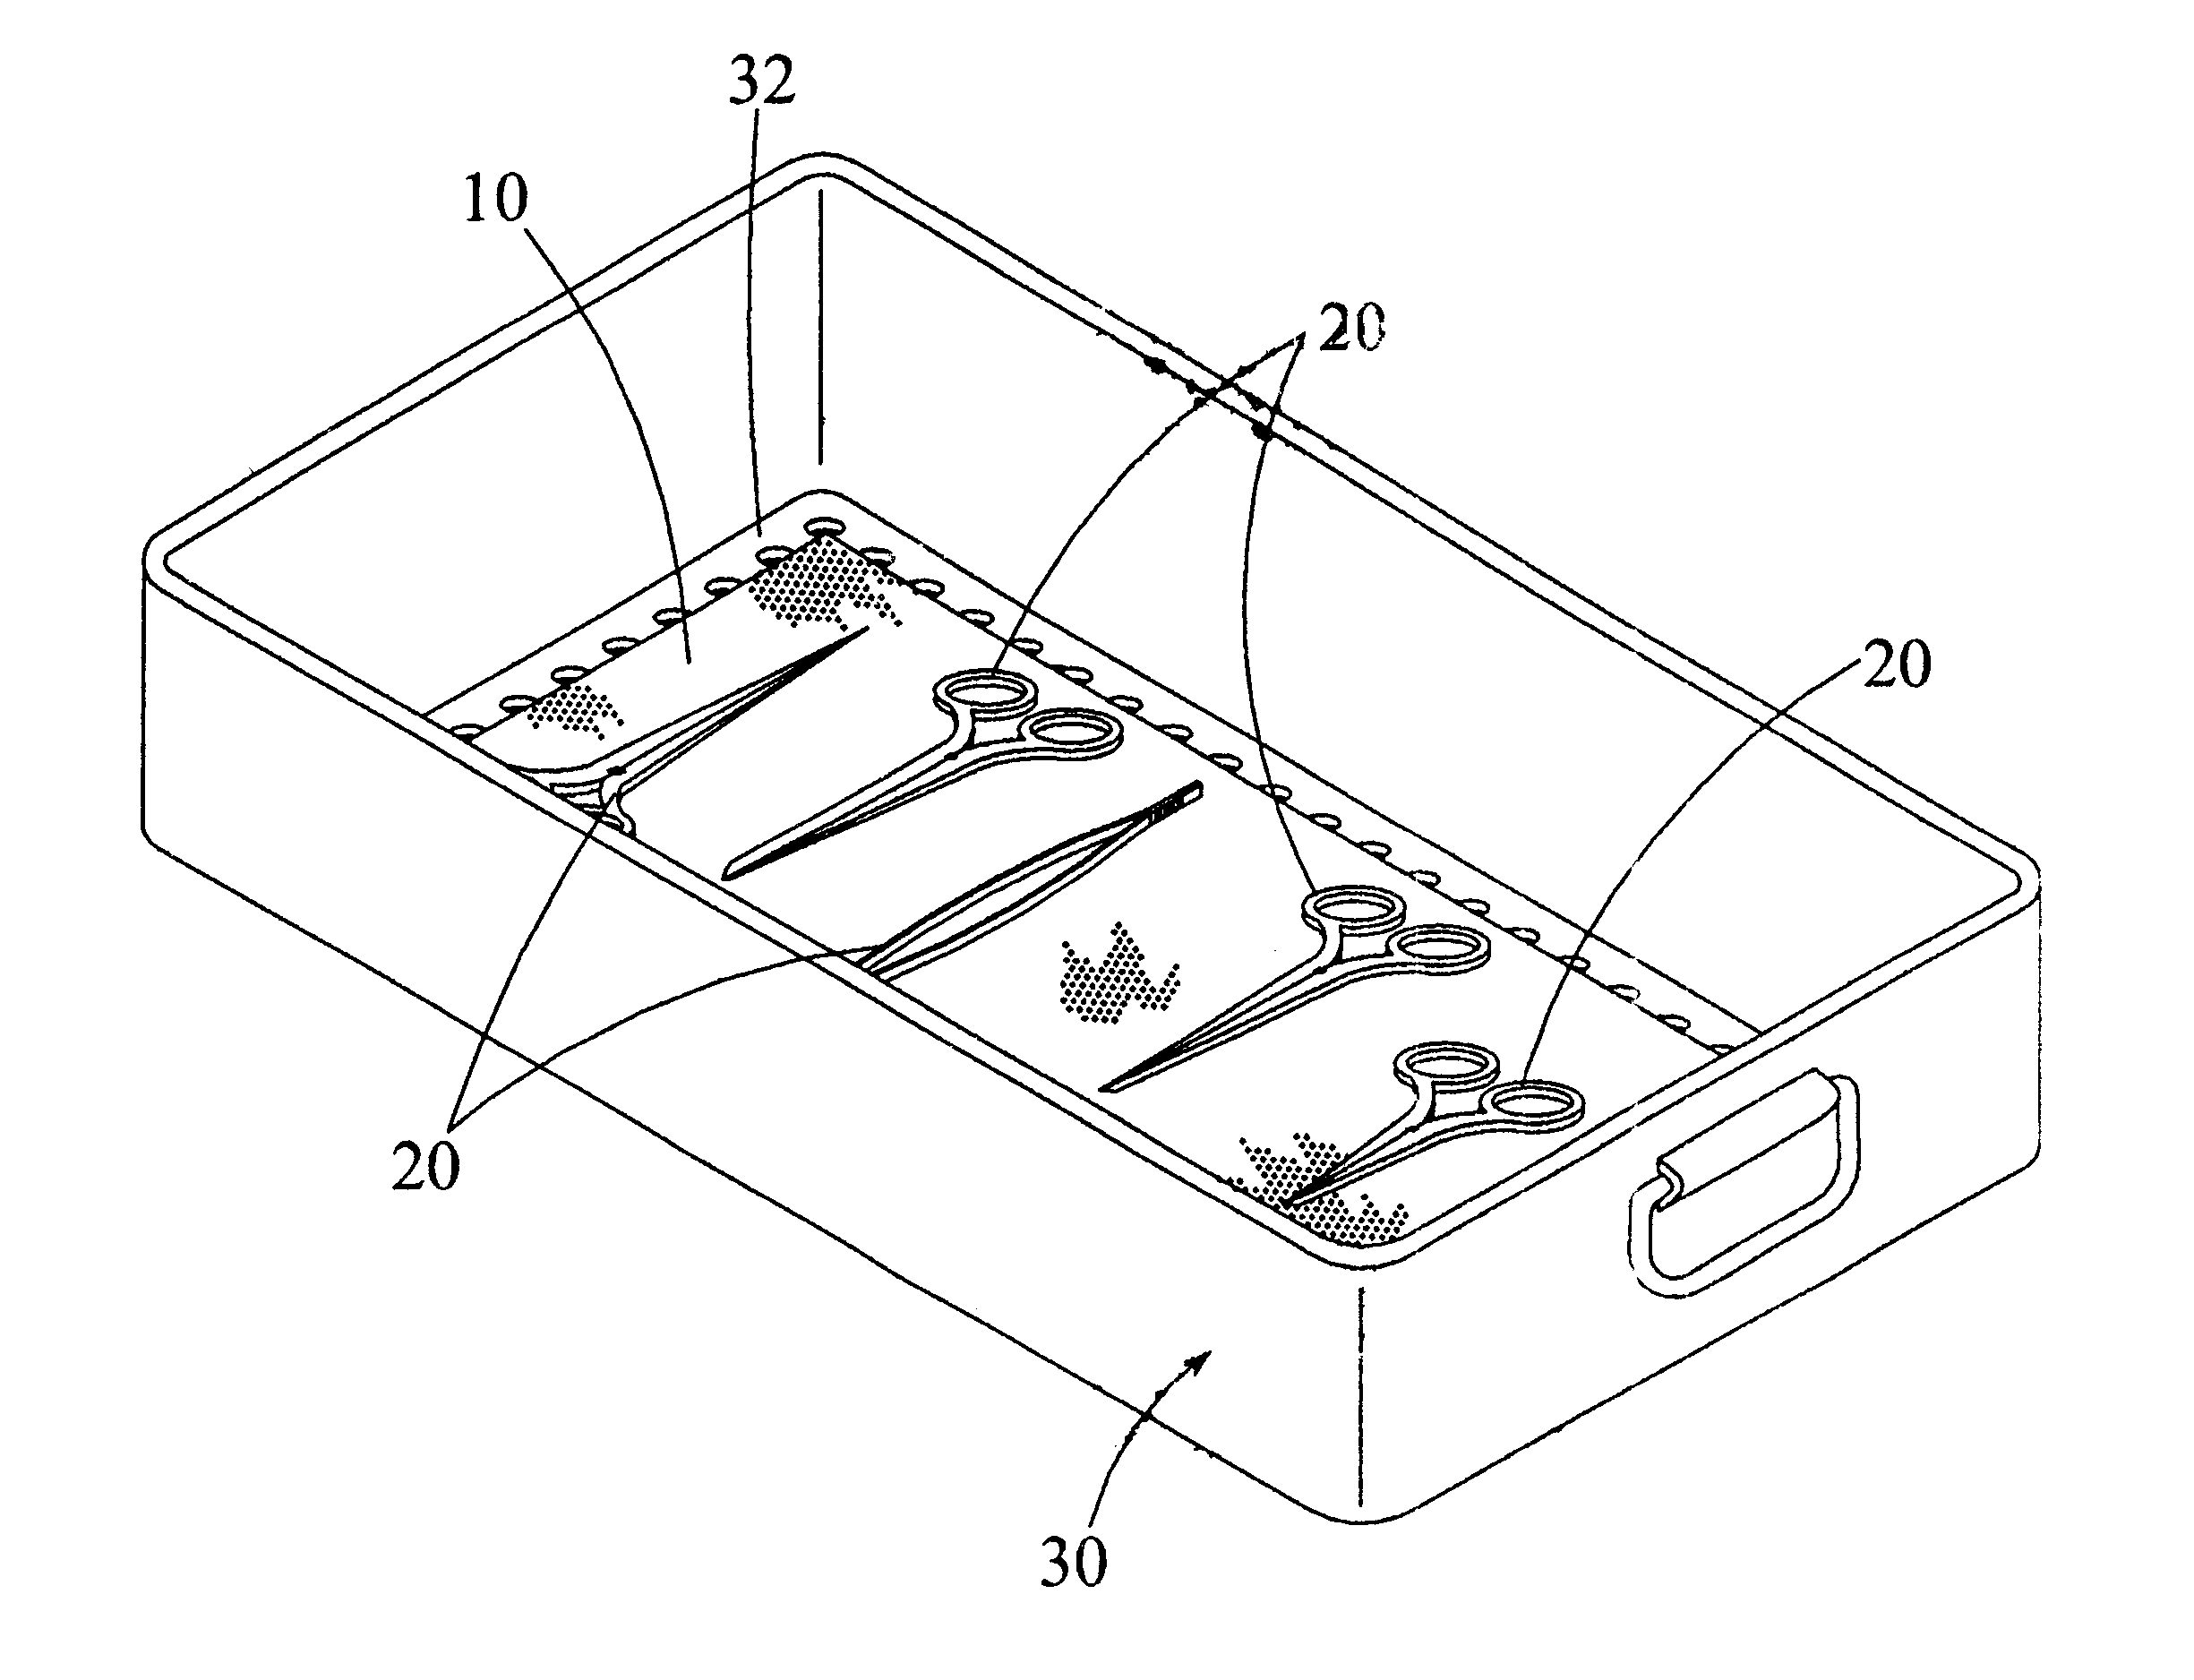 Absorbent instrument trayliner for sterilization process and method of sterilizing surgical instruments